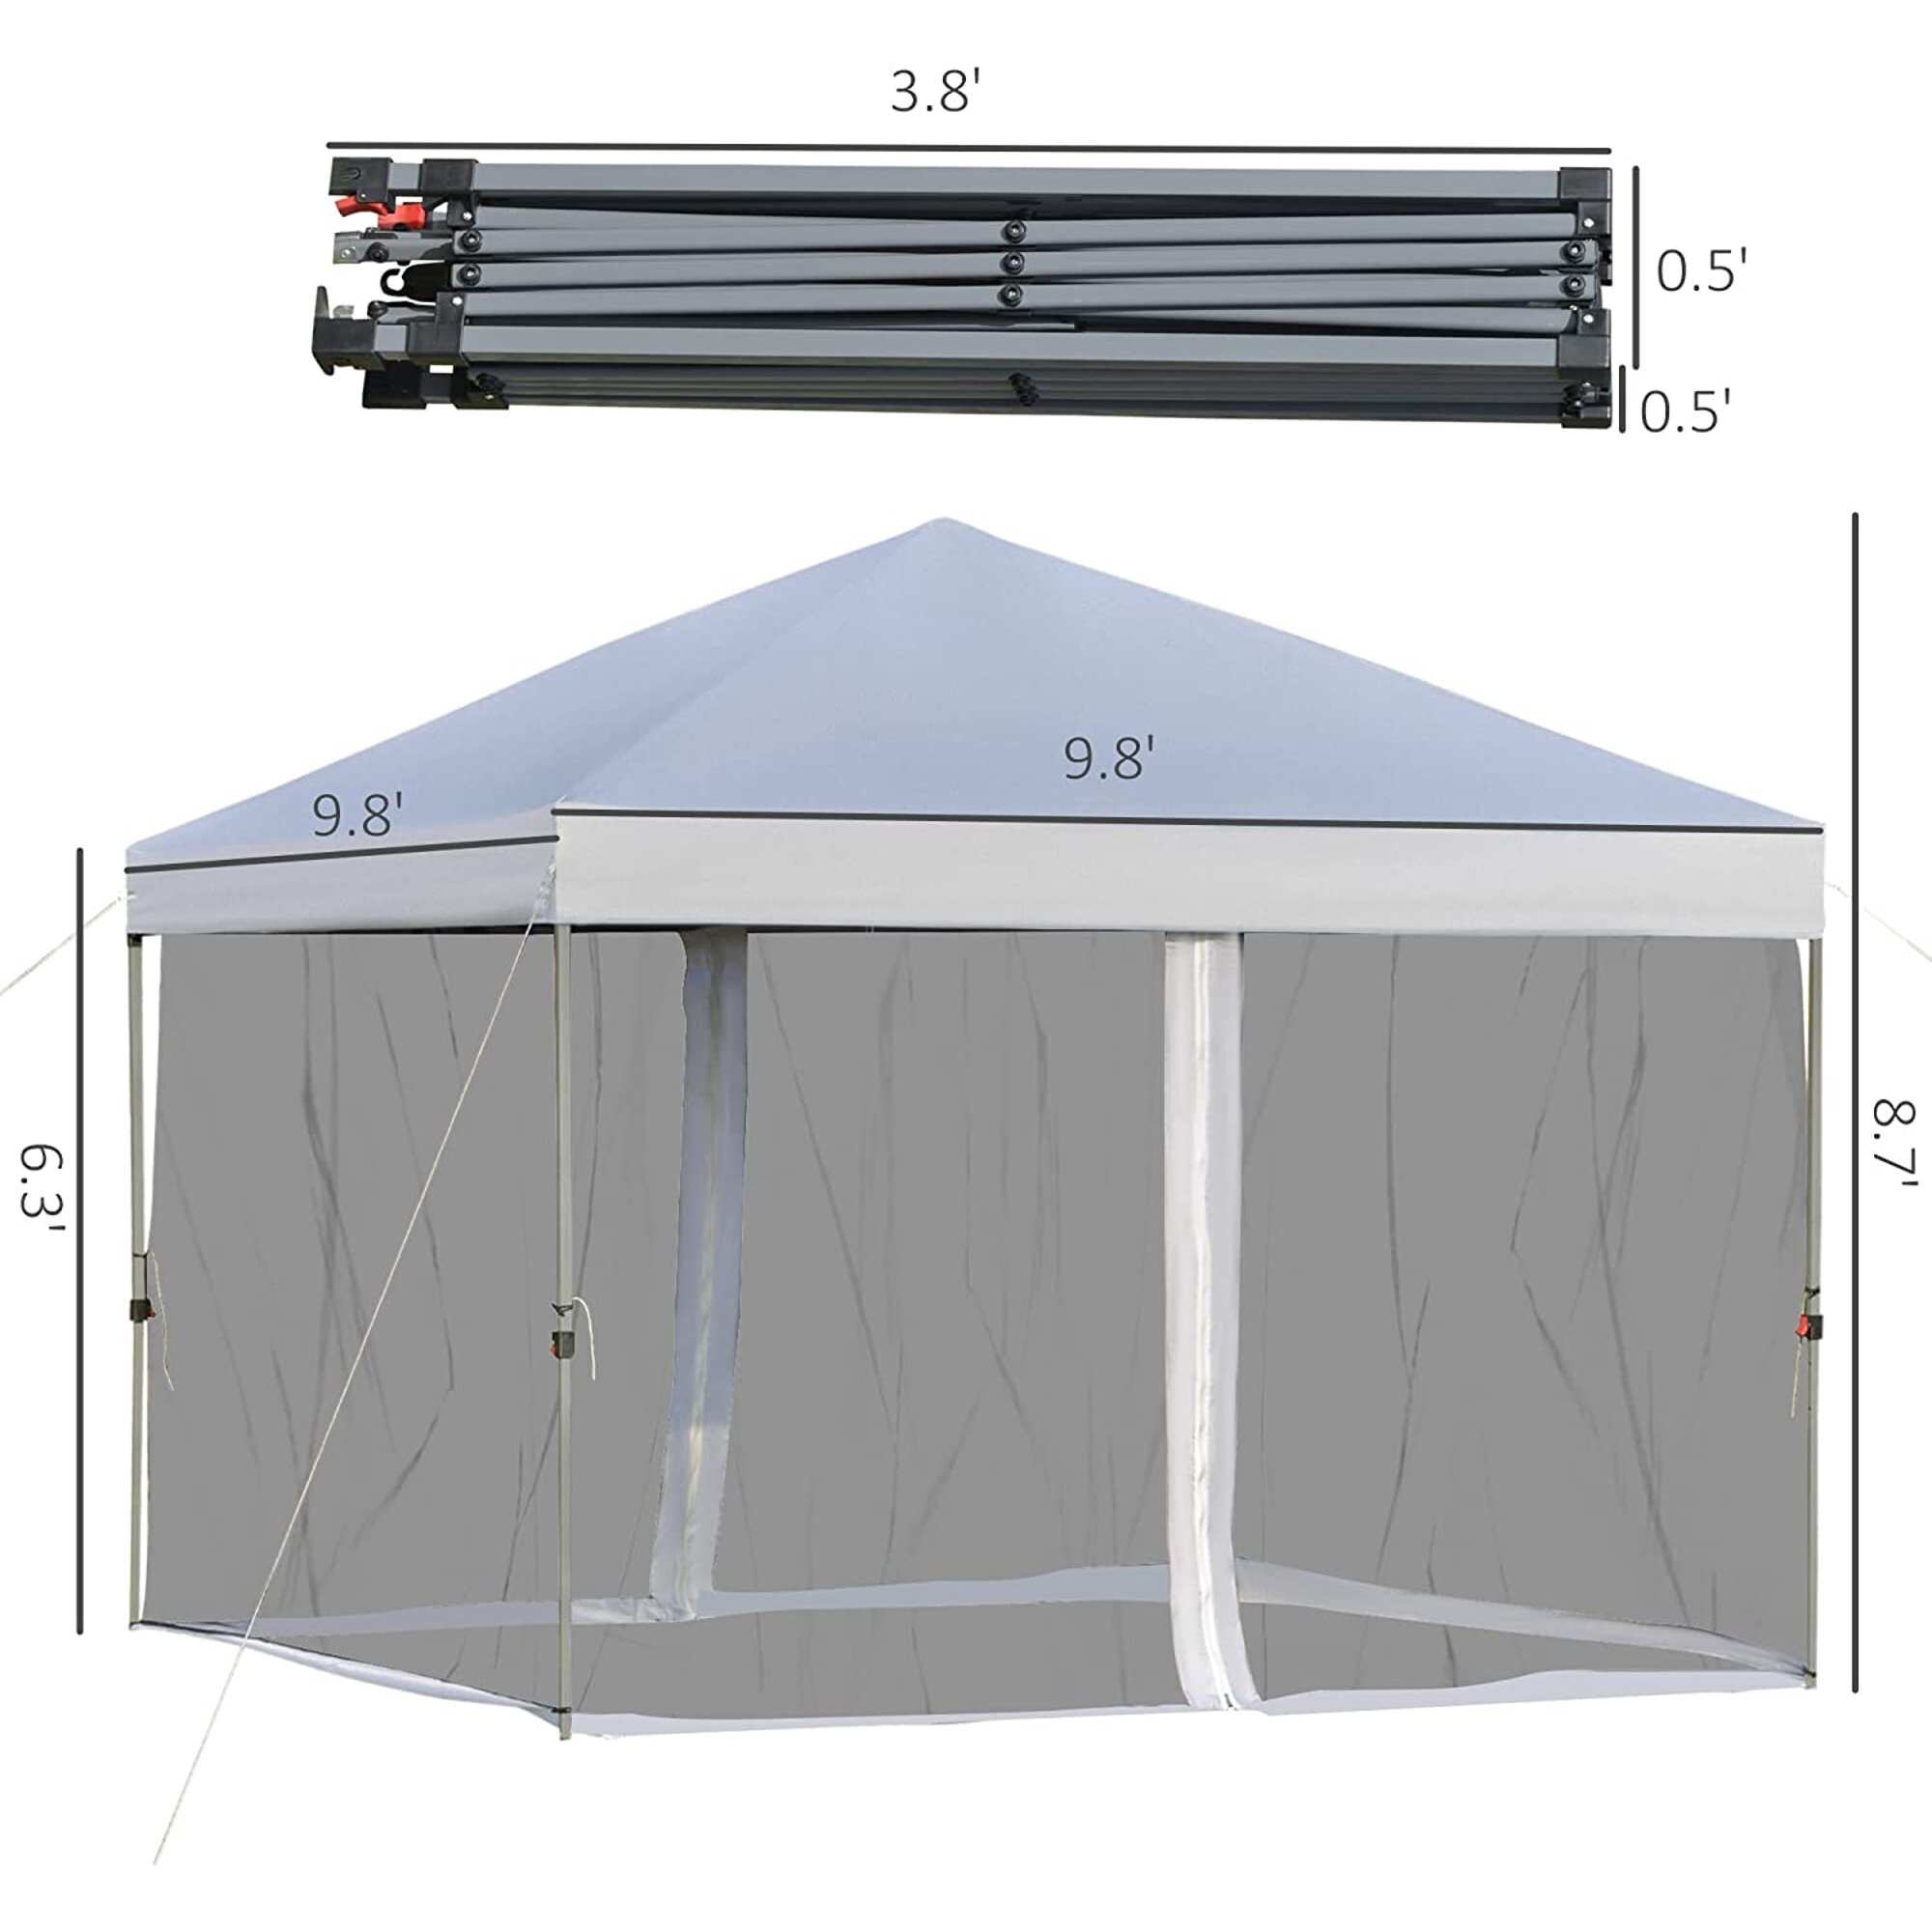 10' x 10' Pop Up Canopy Portable Folding Outdoor Tent Gazebo with Removable Sidewalls Mesh Curtains Carrying Bag Whit